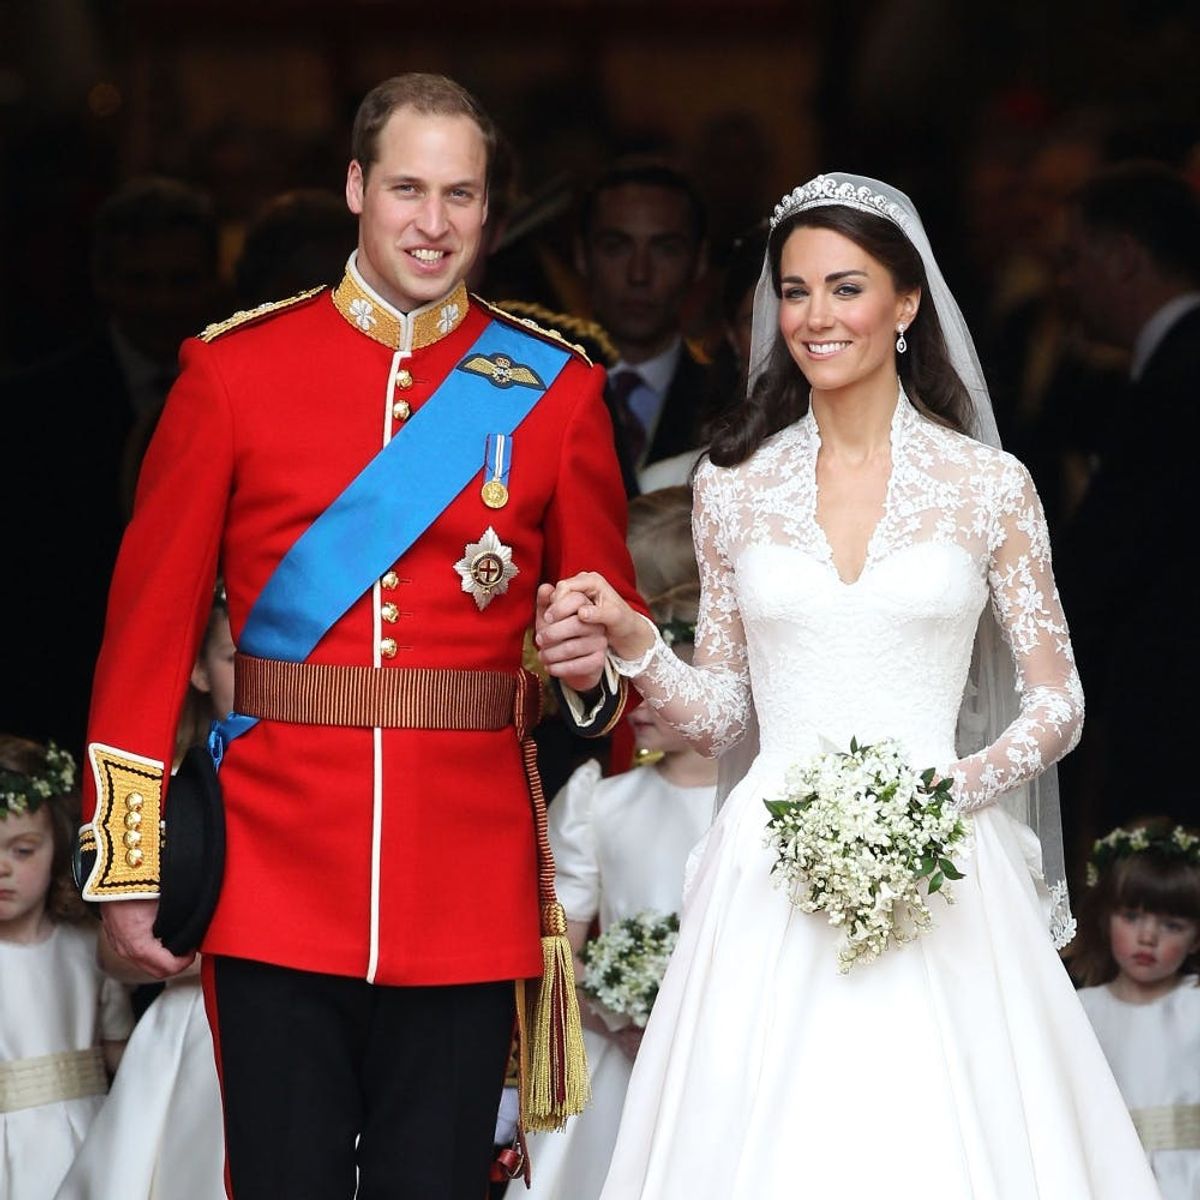 Prince William and Kate Middleton’s Wedding Playlist May Totally Surprise You